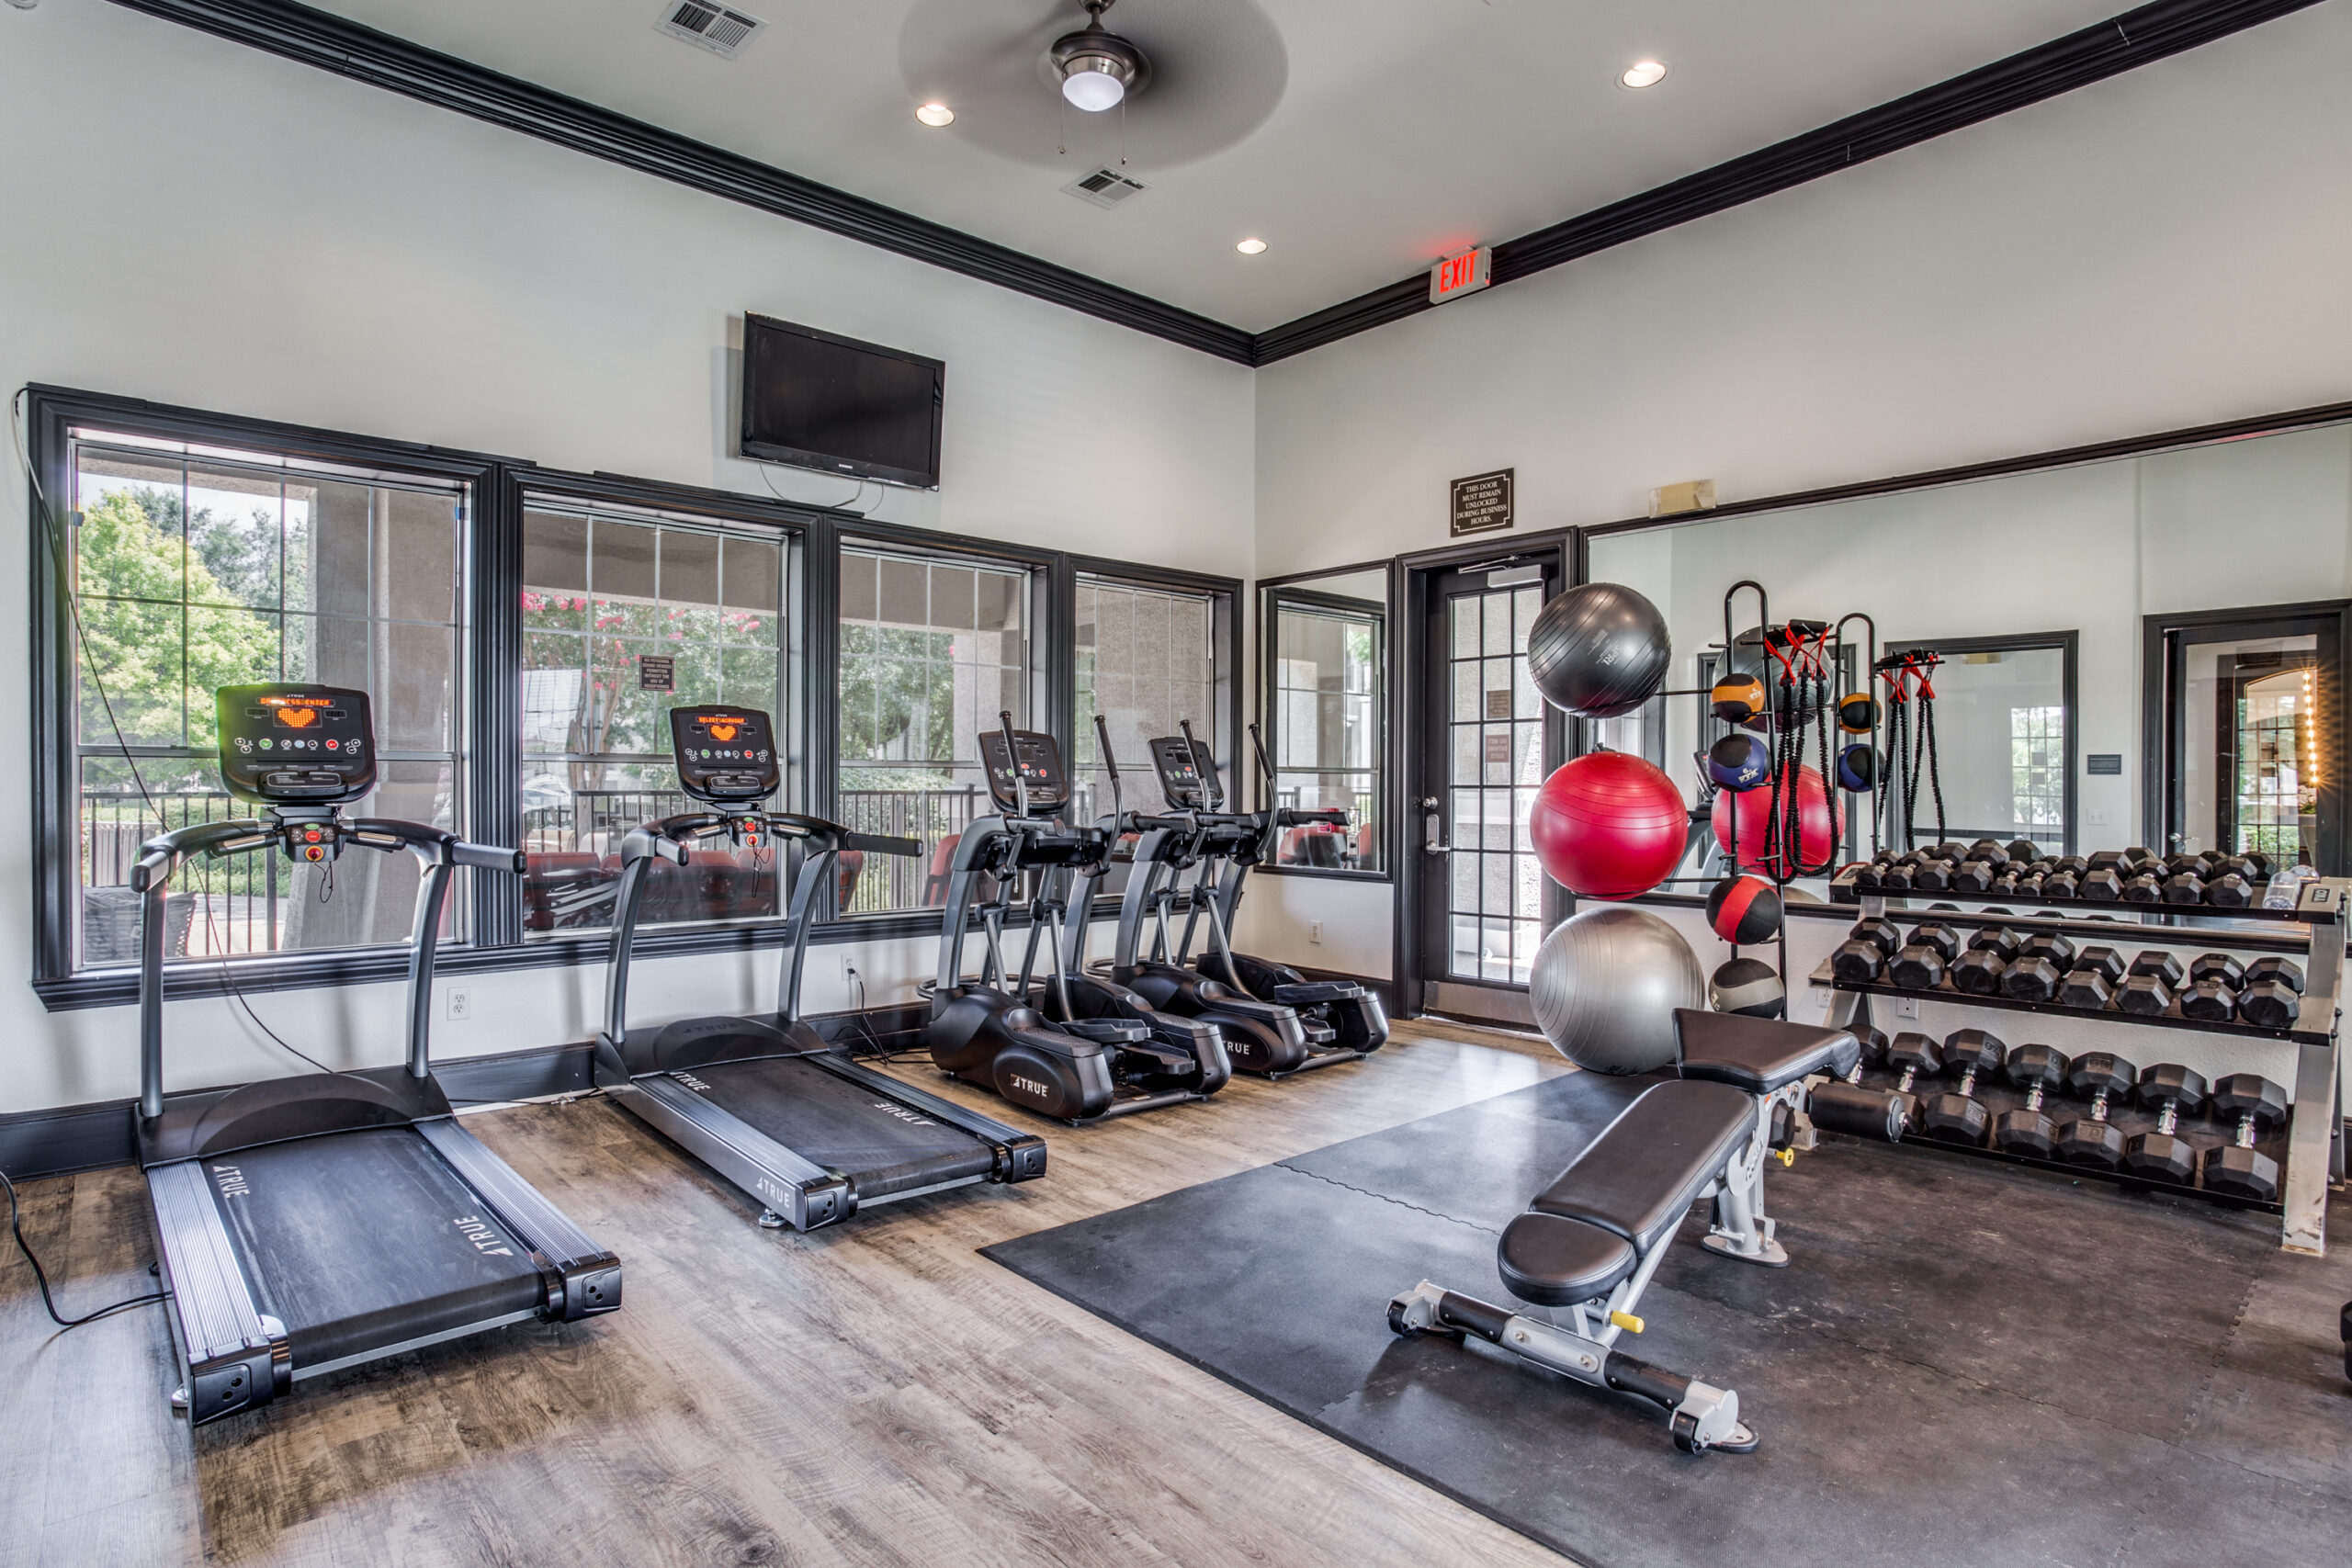 fitness center with free weights, medicine balls, treadmills and more